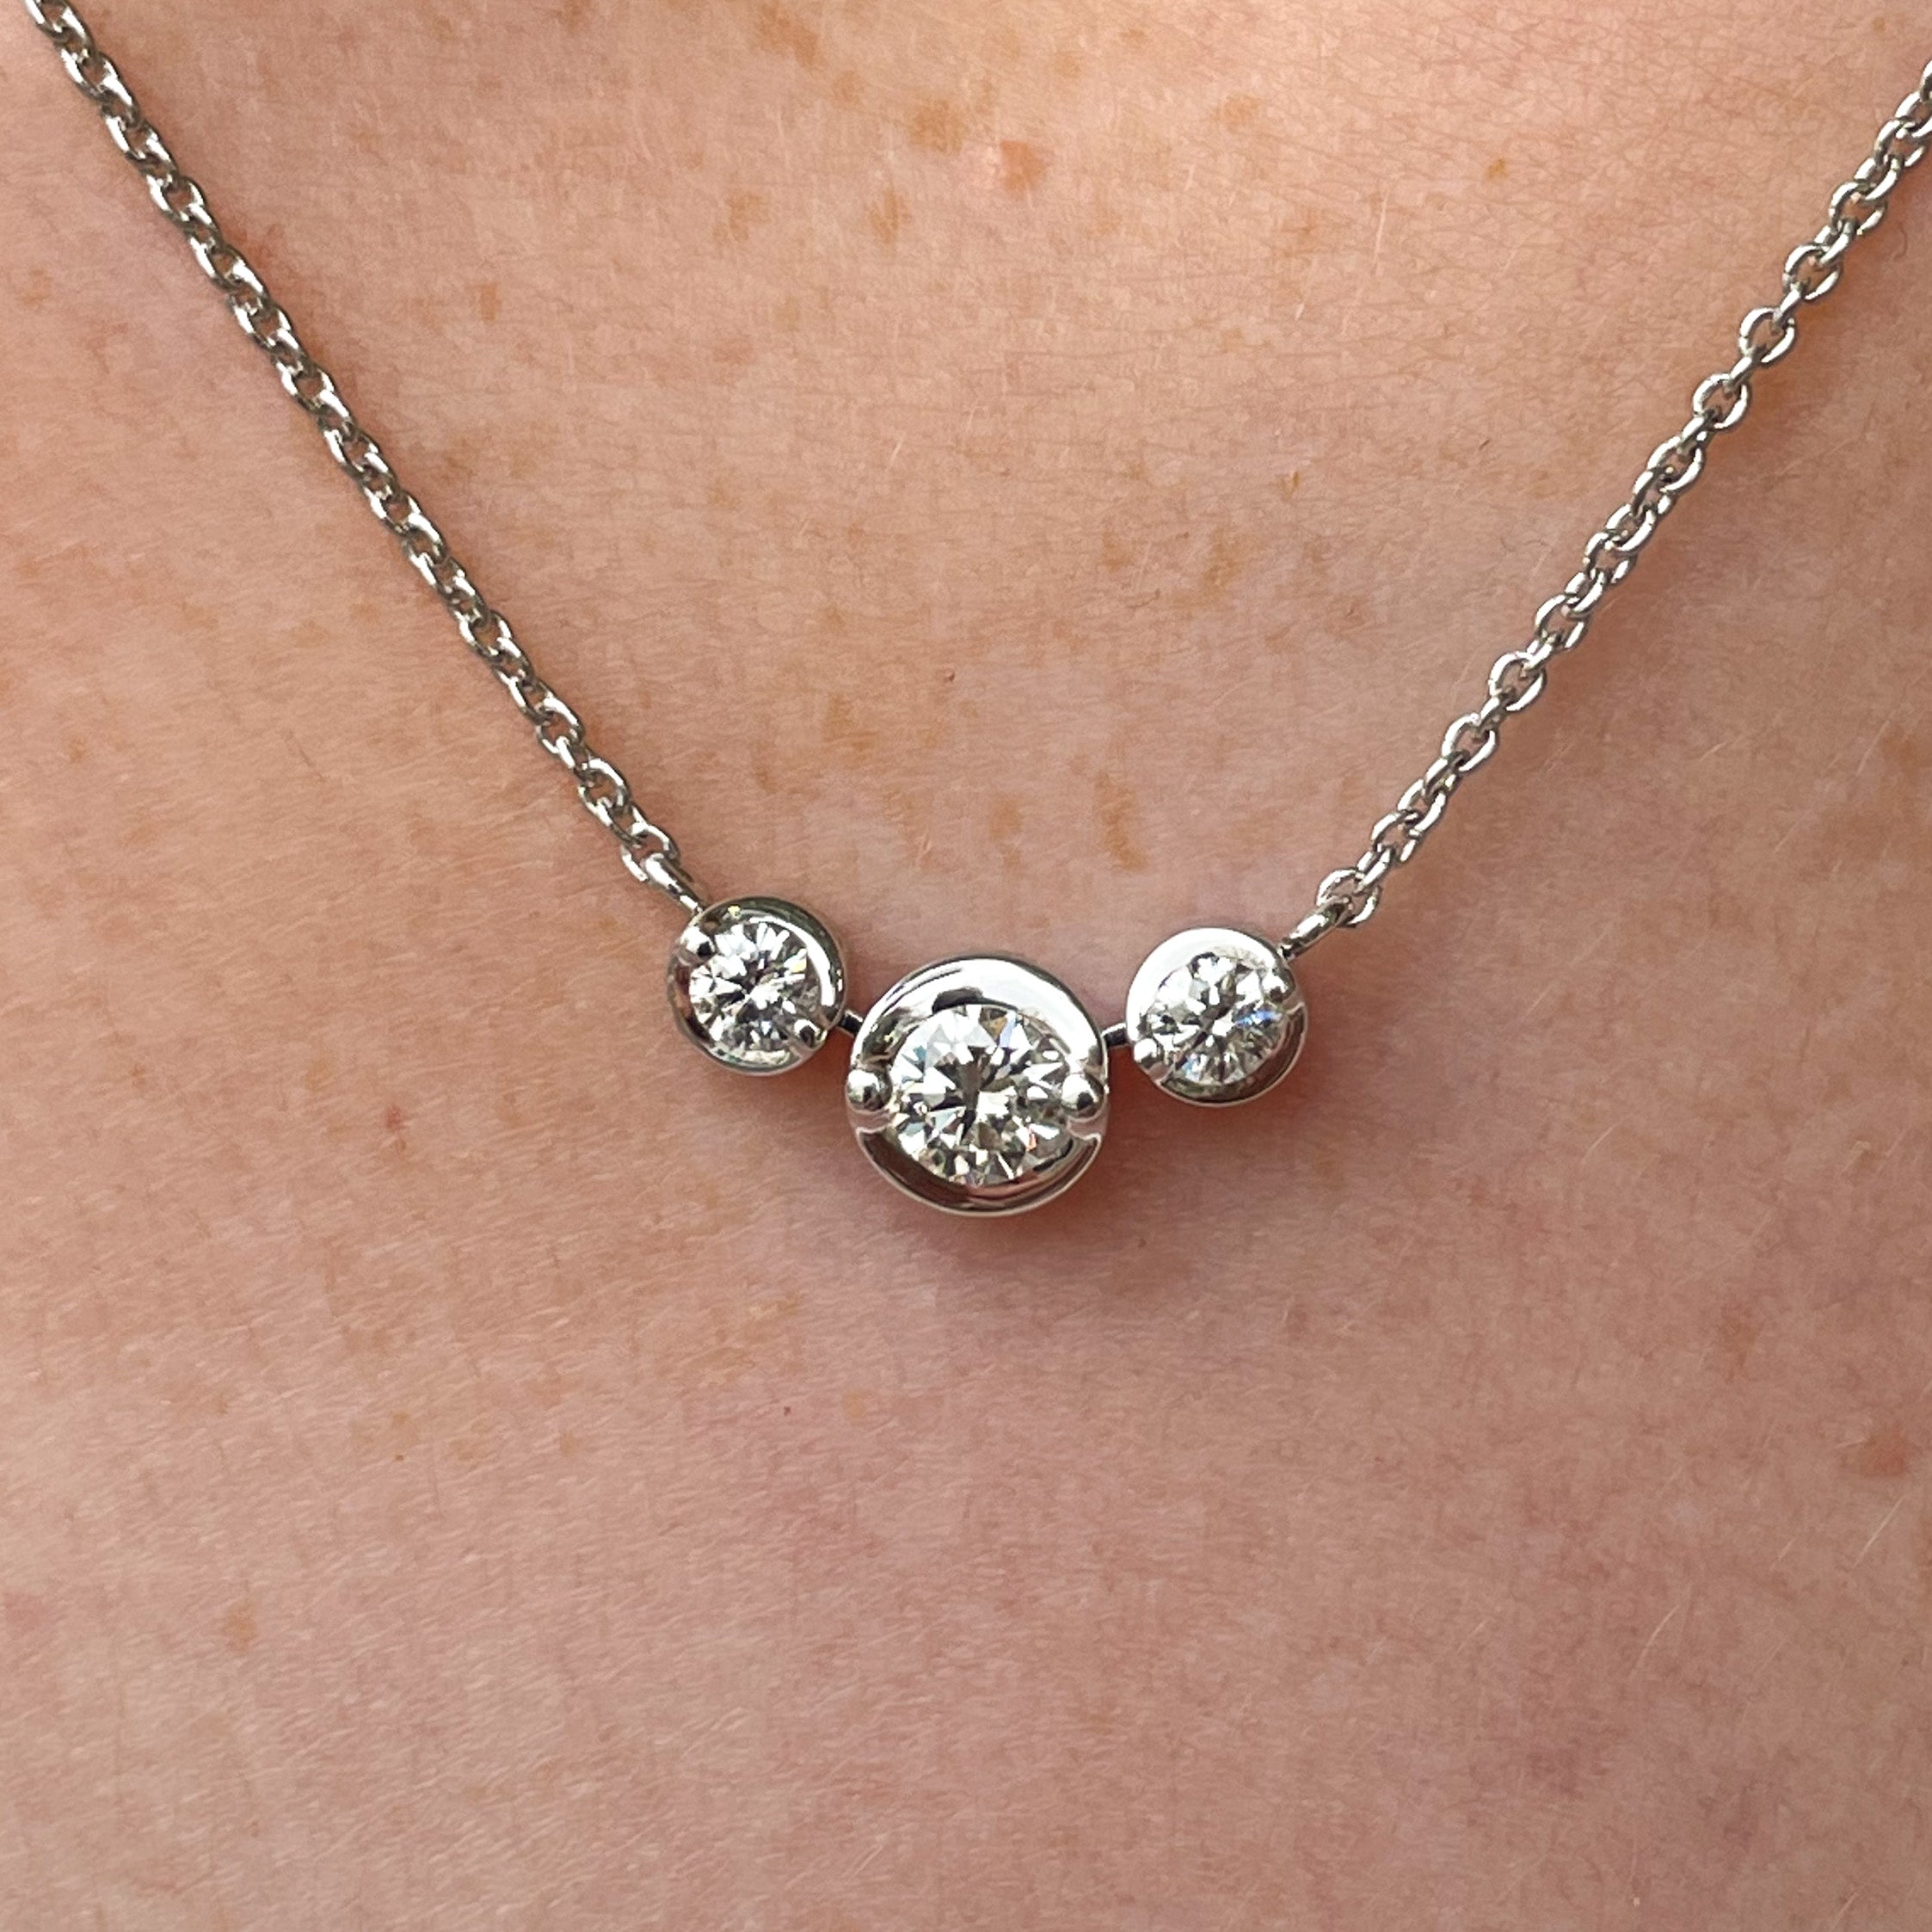 SK Jewellery - Our Star Carat Classic Trilogy Diamond Necklace is the  perfect shine enhancer. Whether you are in the mood for dressing up or  staying casual, be sure to get heads